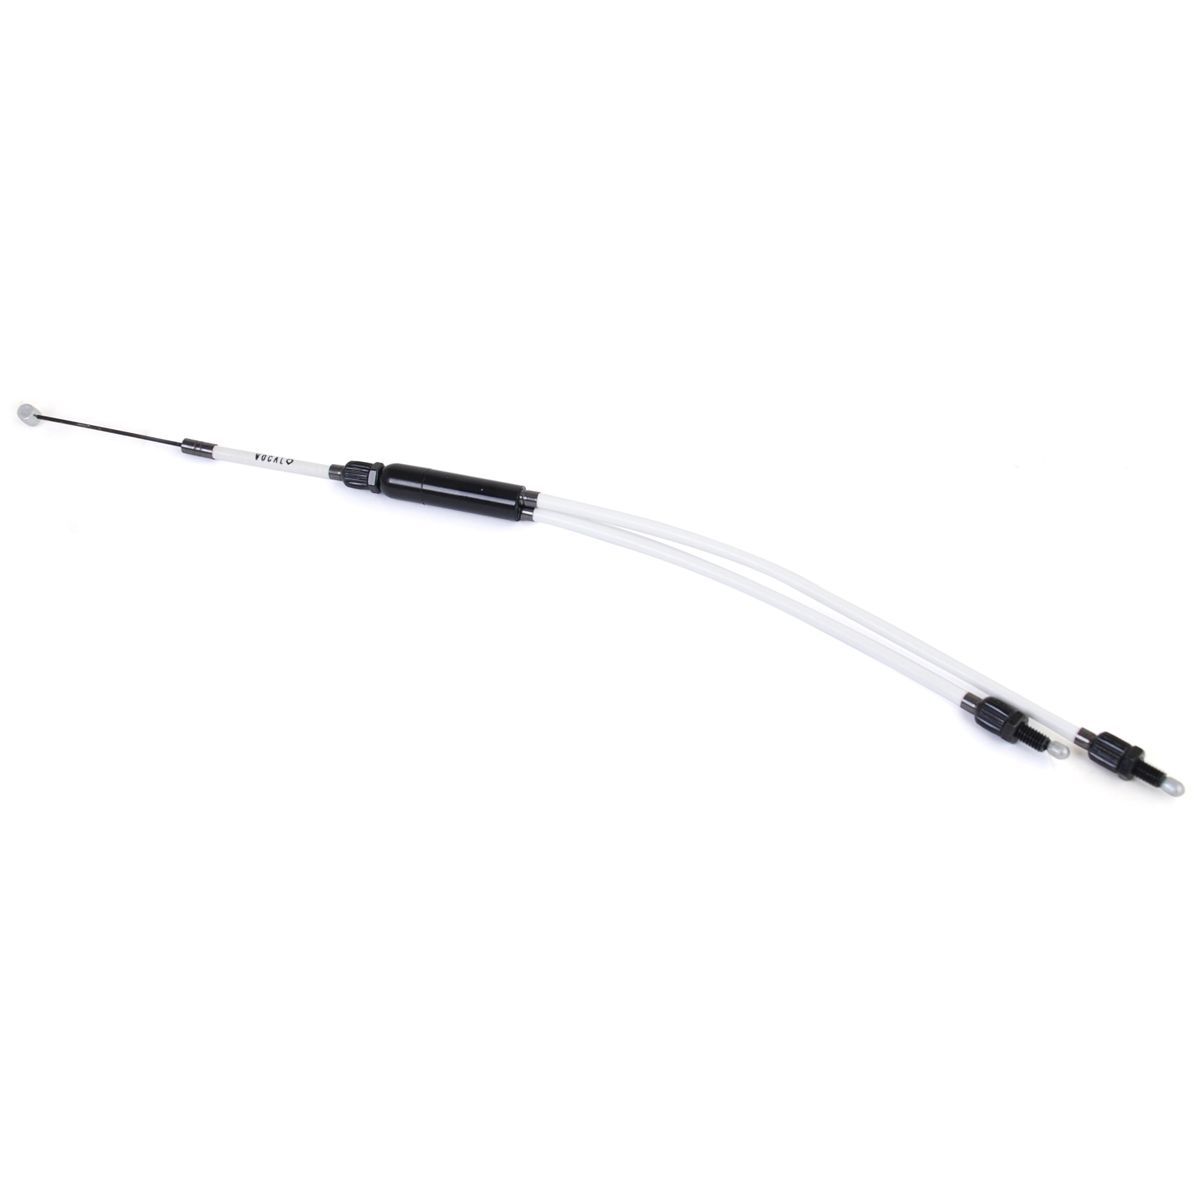 Vocal BMX Pro Linear Lower 2-1 Gyro Cable